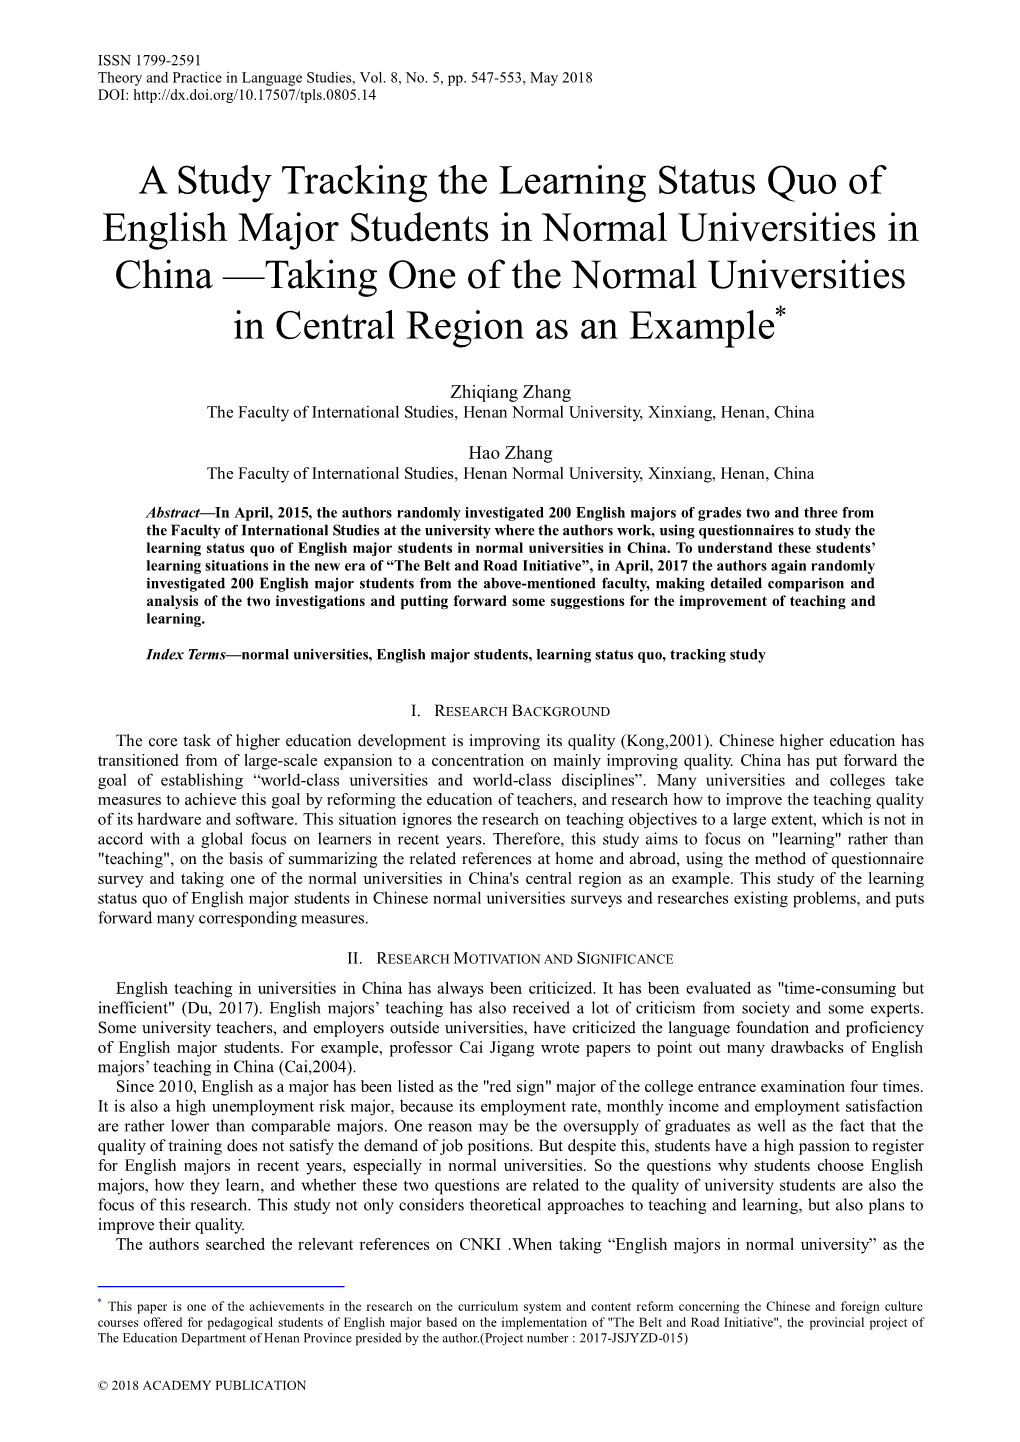 A Study Tracking the Learning Status Quo of English Major Students In